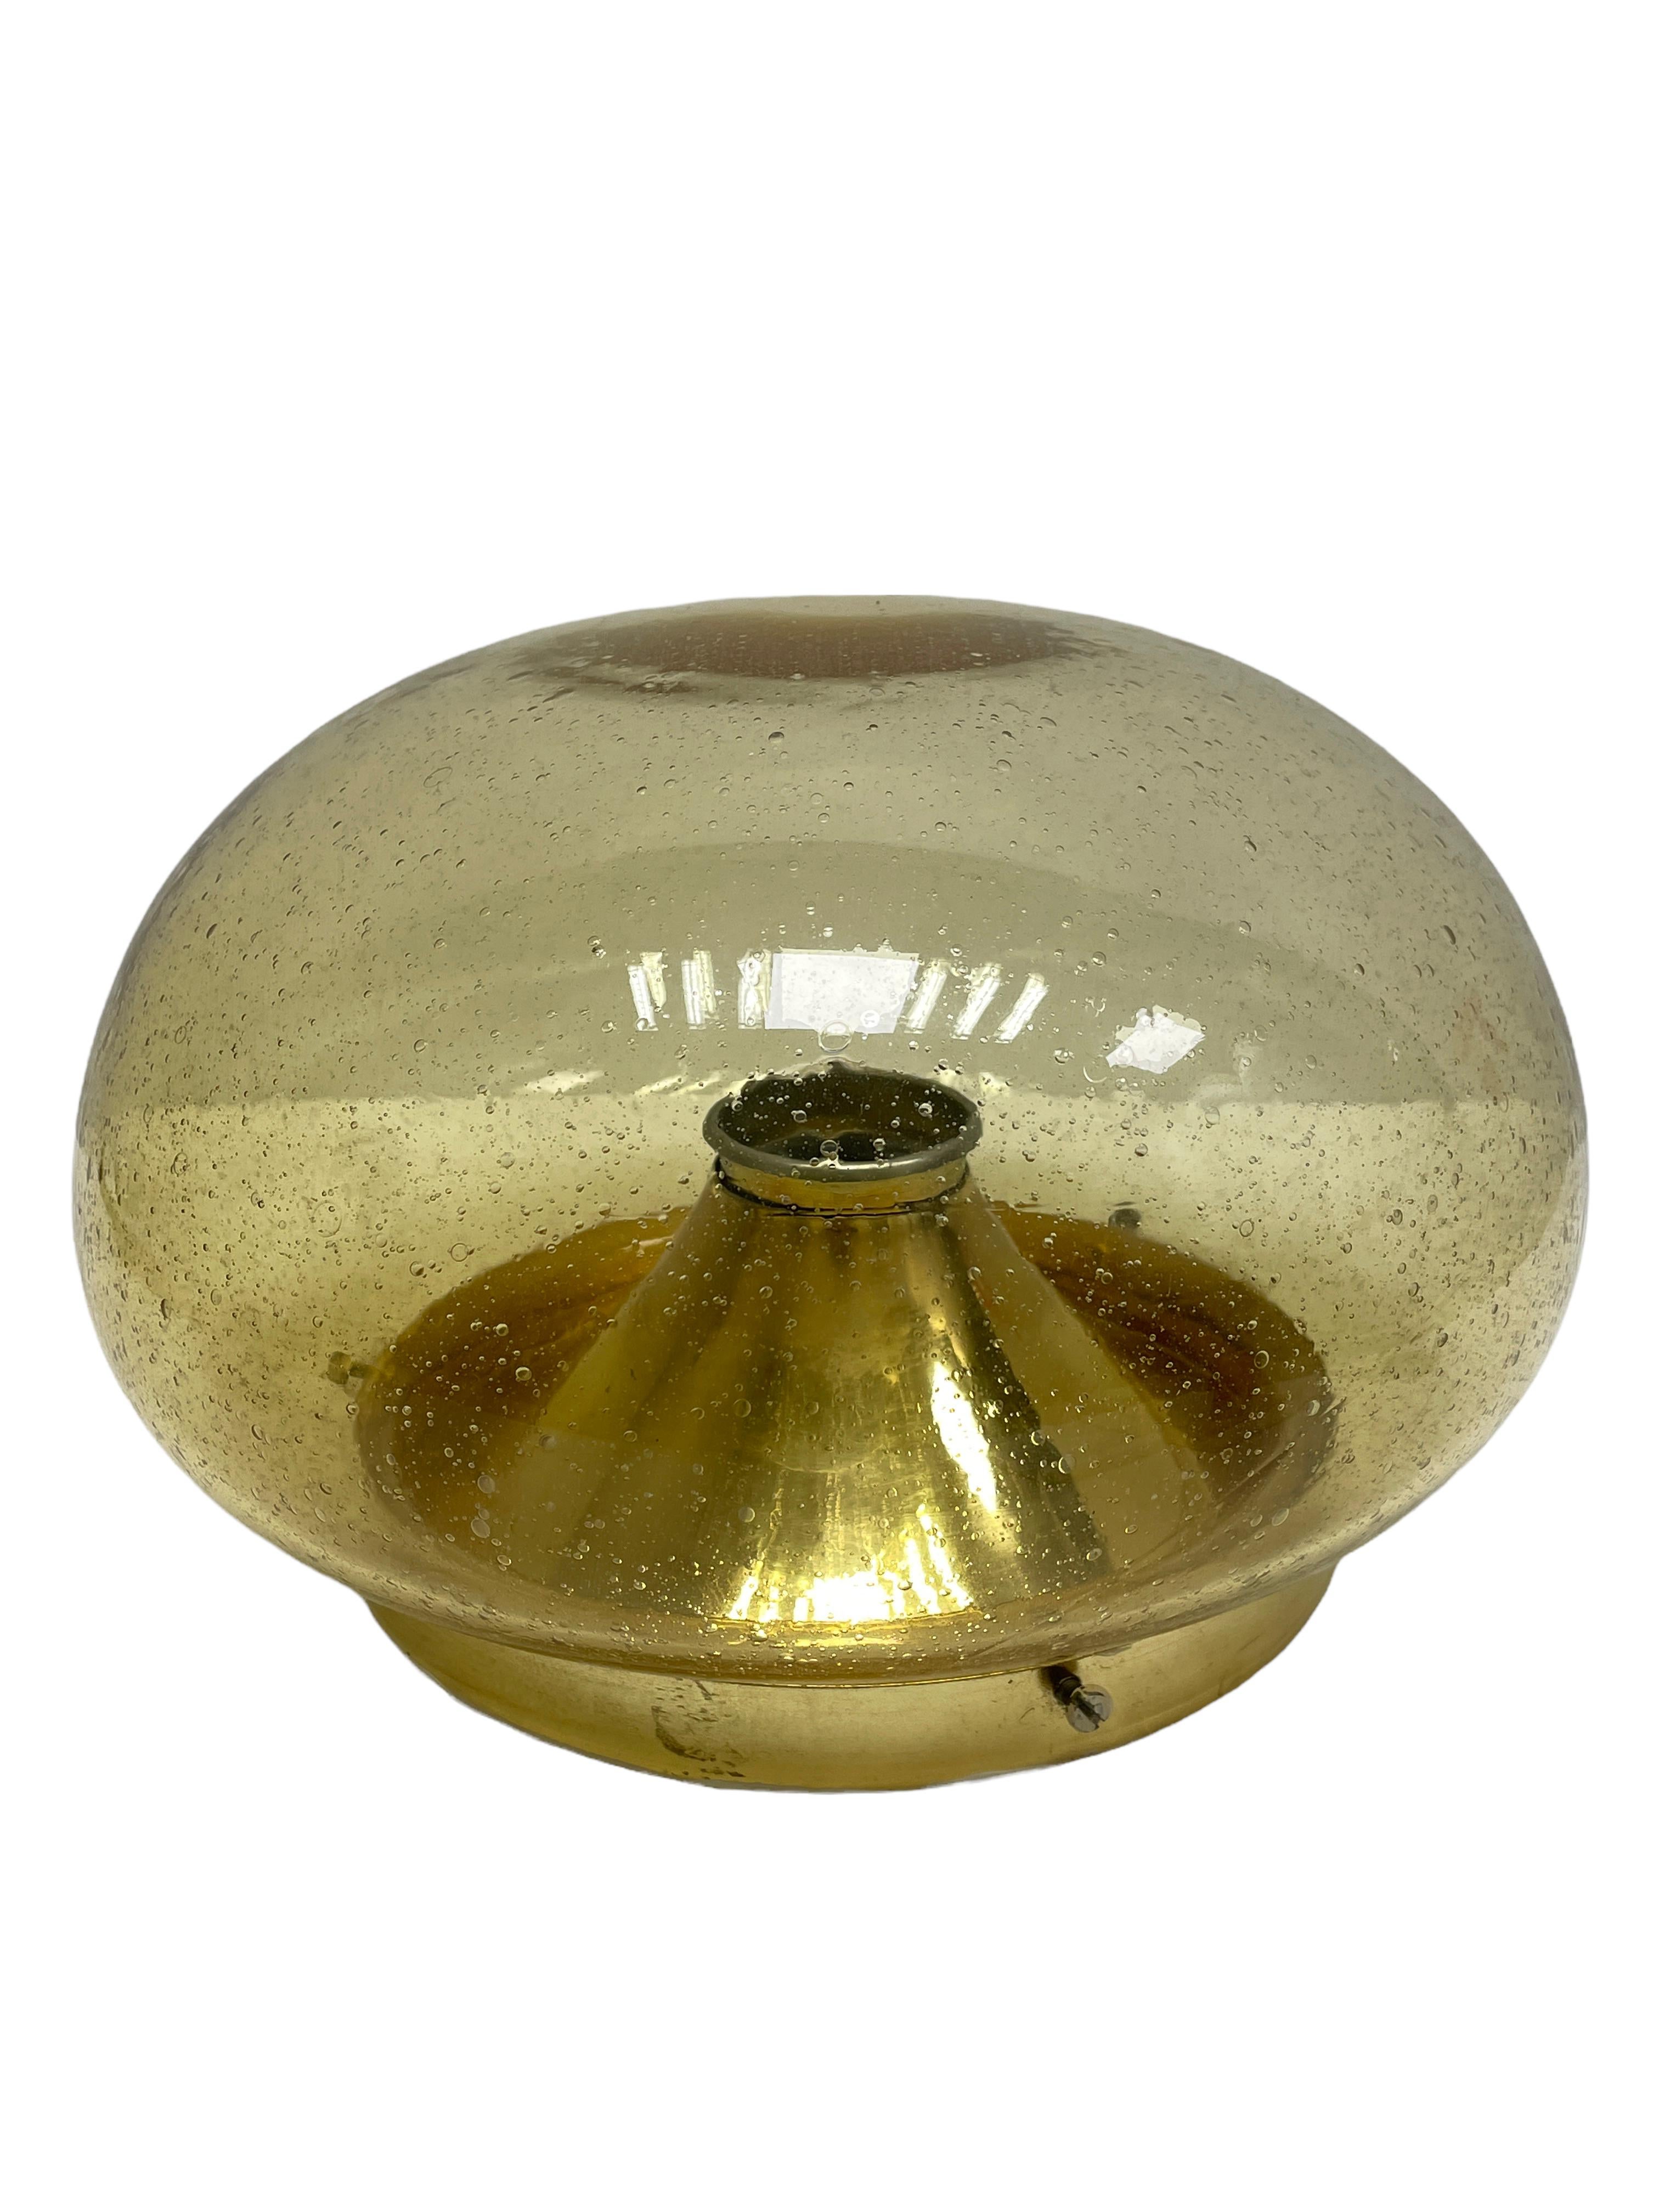 A beautiful flush mount by German manufacturer Glashuette Limburg. The bubble glass element is supported by a polished brass plate with a one light source. Beautiful bubble glass on a metal fixture. The Fixture requires one European E27 / 110 Volt